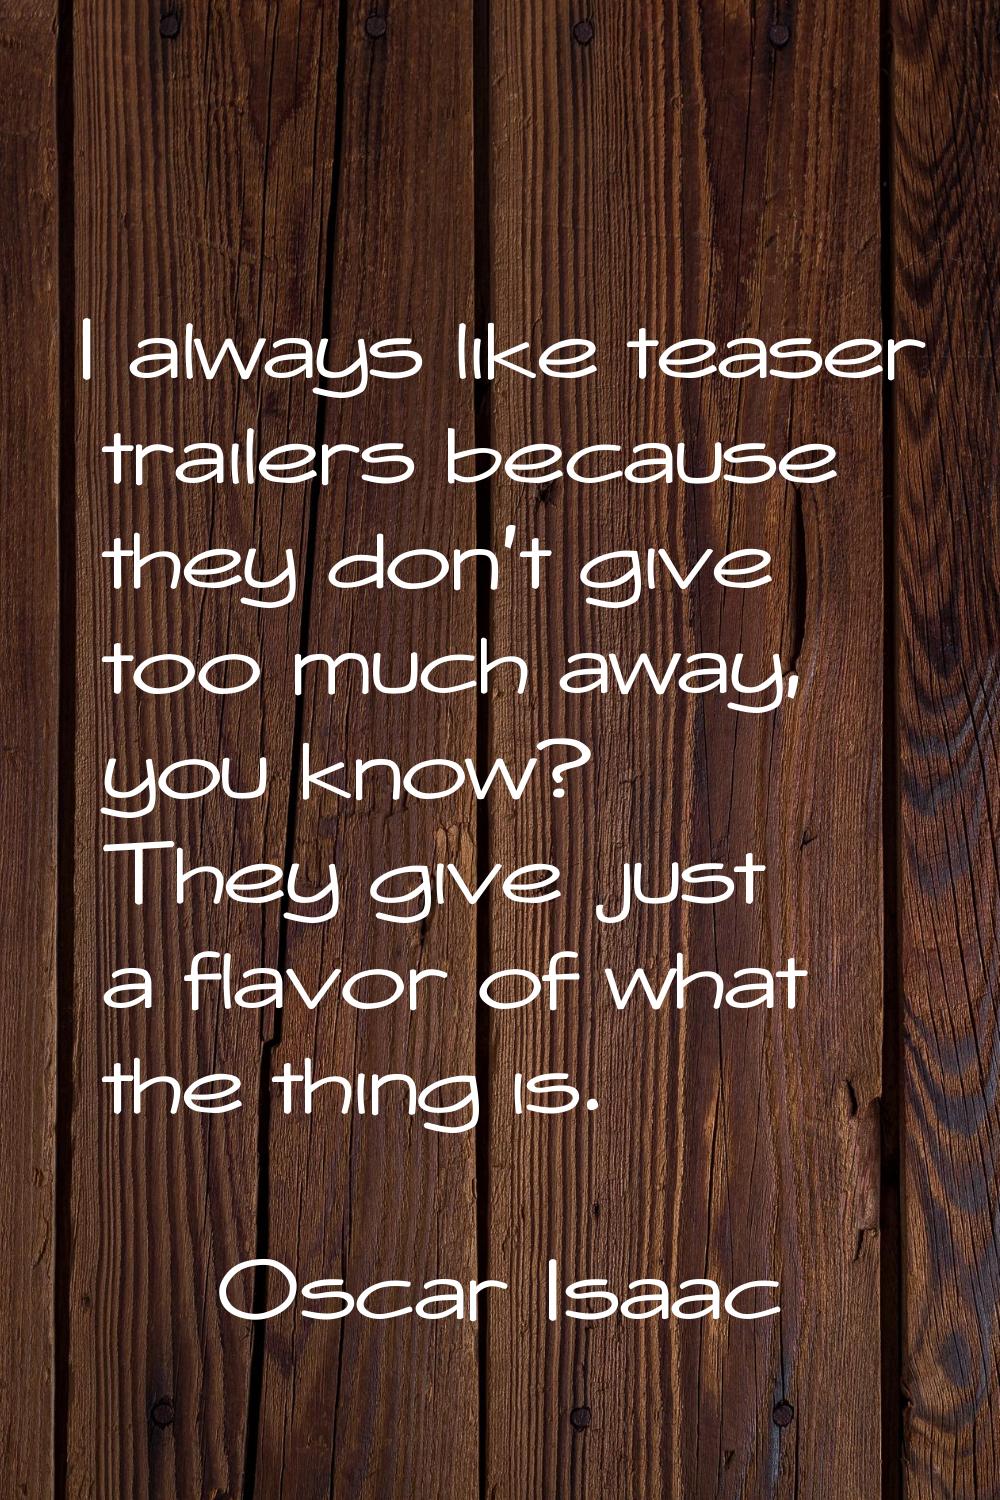 I always like teaser trailers because they don't give too much away, you know? They give just a fla